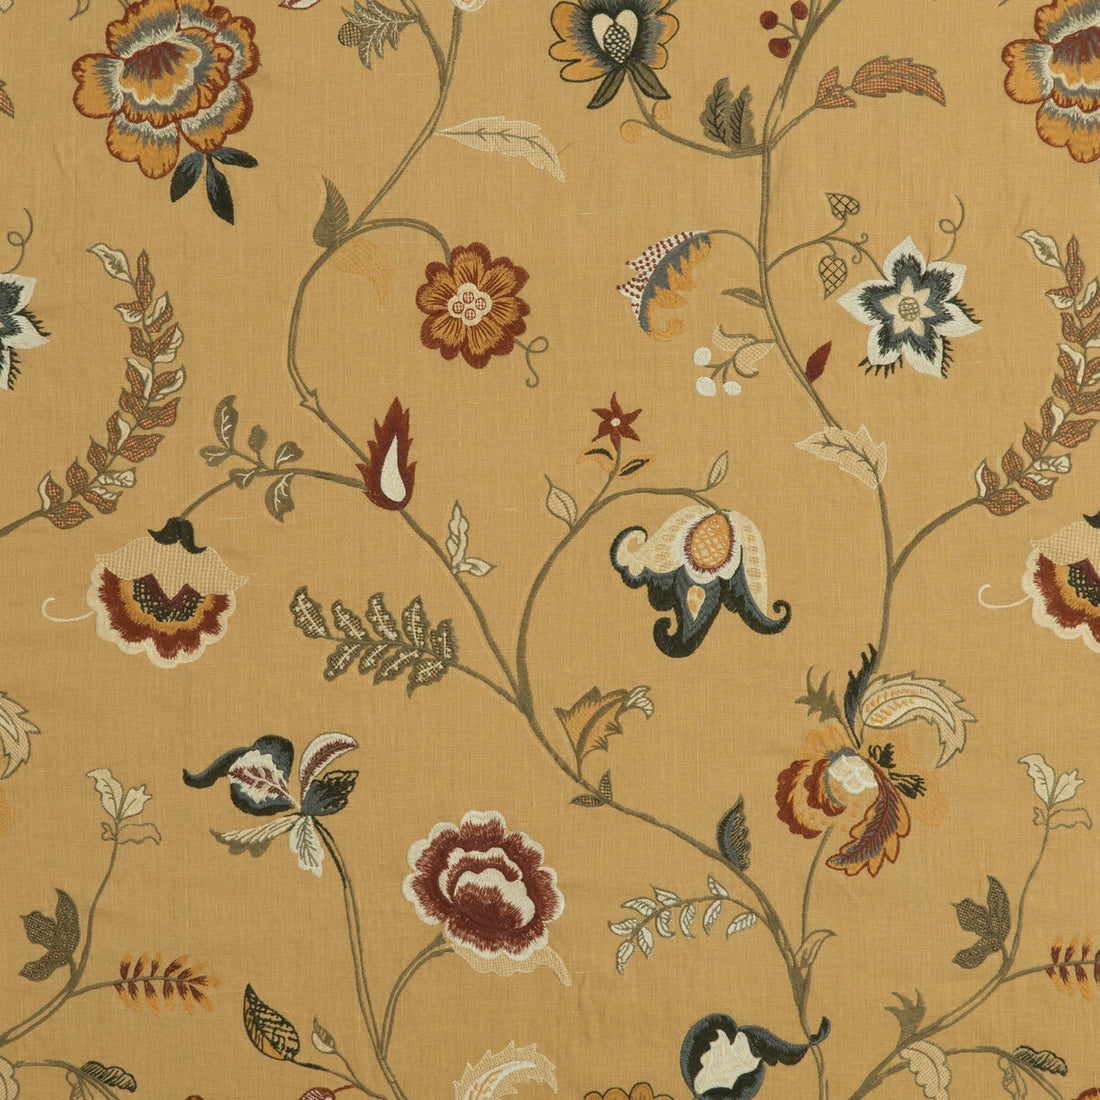 Elidora fabric in spice color - pattern FD709.T30.0 - by Mulberry in the Bohemian Romance collection